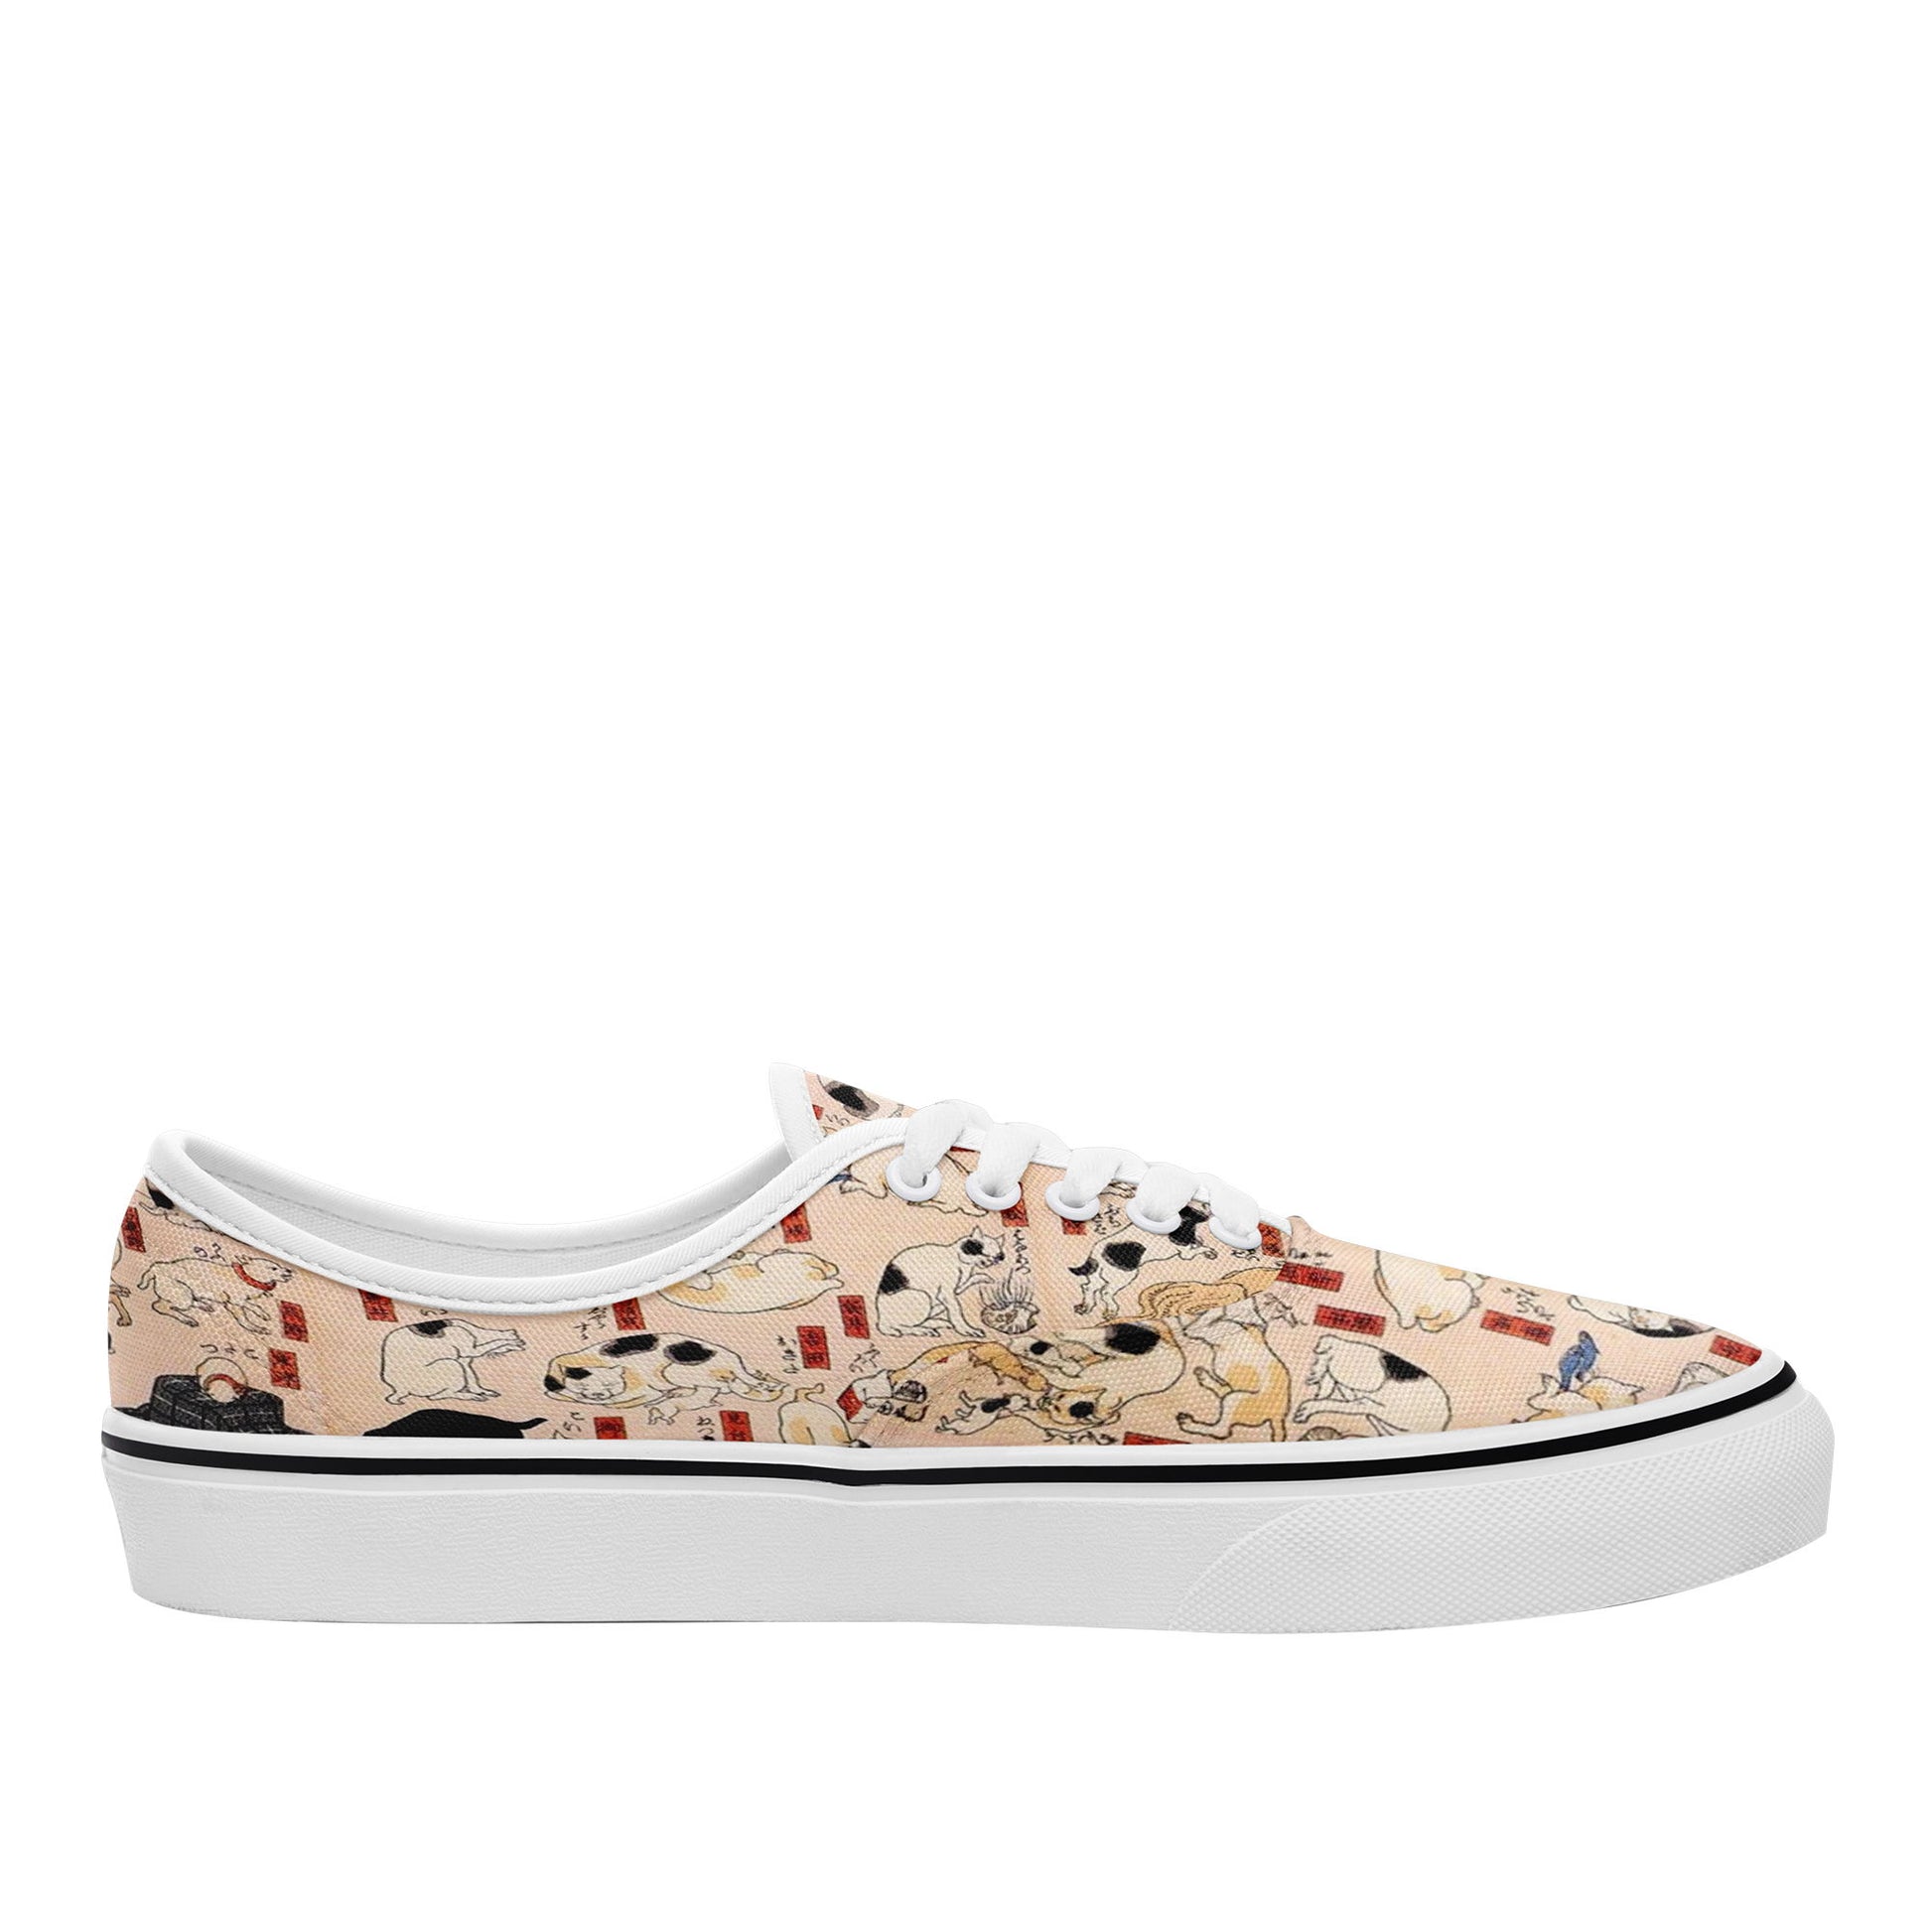 customize printed casual shoes 7213 with retro art ukiyo-e kuniyoshi utagawa's cats suggested as the fifty three stations of the tokaido sneakers white soles 3